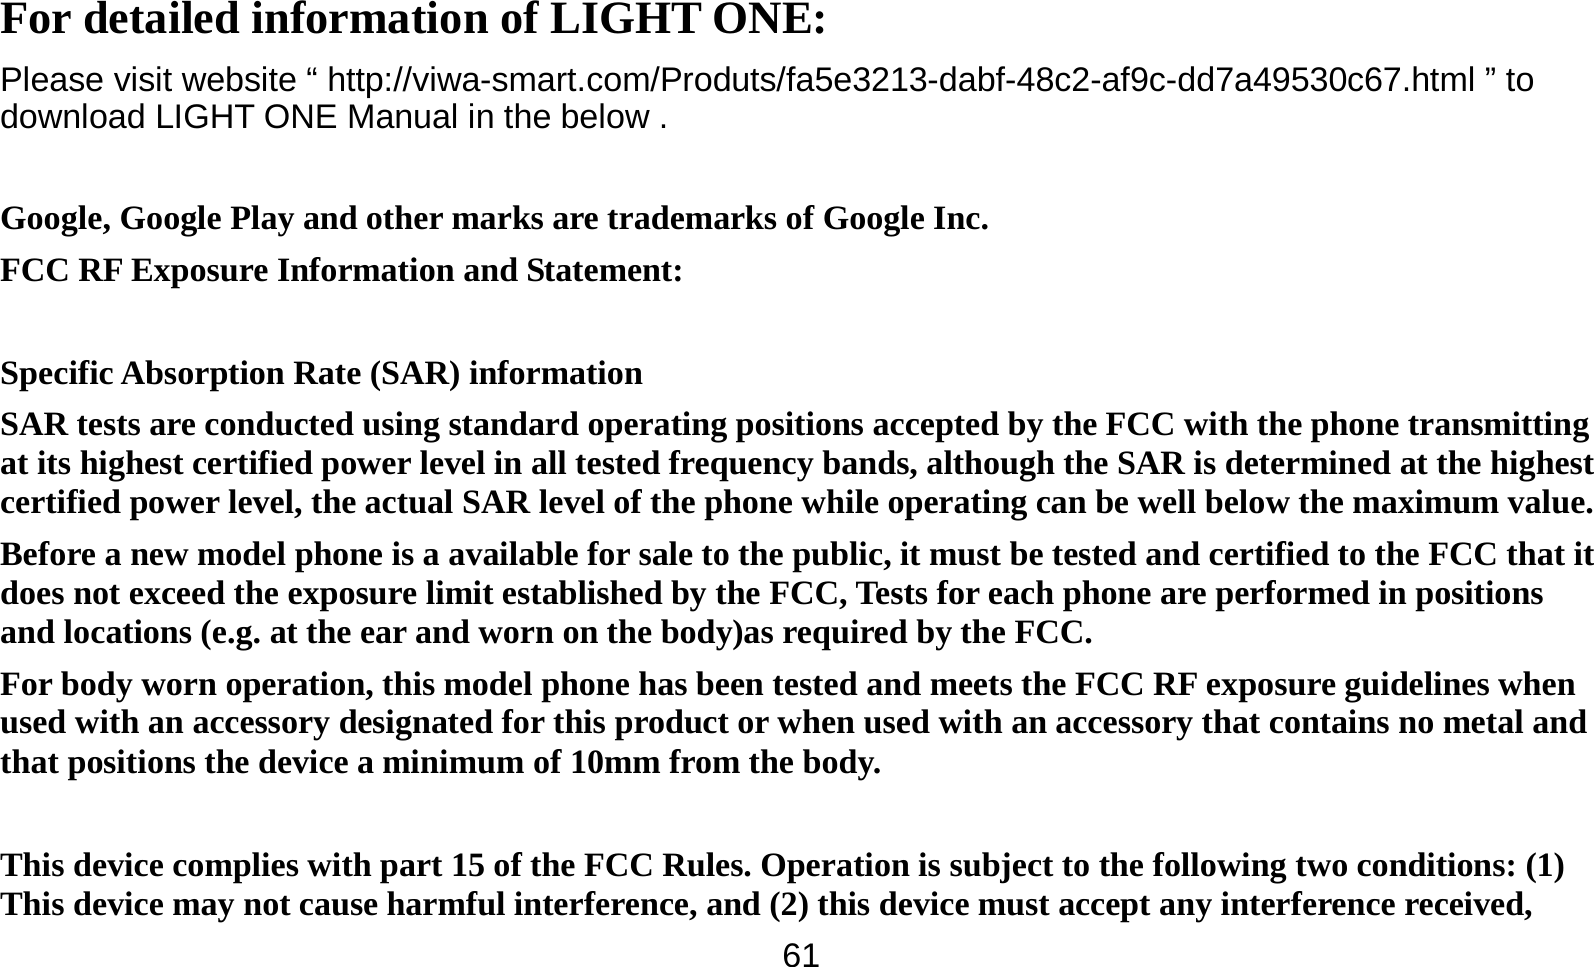   61For detailed information of LIGHT ONE: Please visit website “ http://viwa-smart.com/Produts/fa5e3213-dabf-48c2-af9c-dd7a49530c67.html ” to download LIGHT ONE Manual in the below .  Google, Google Play and other marks are trademarks of Google Inc. FCC RF Exposure Information and Statement:  Specific Absorption Rate (SAR) information SAR tests are conducted using standard operating positions accepted by the FCC with the phone transmitting at its highest certified power level in all tested frequency bands, although the SAR is determined at the highest certified power level, the actual SAR level of the phone while operating can be well below the maximum value. Before a new model phone is a available for sale to the public, it must be tested and certified to the FCC that it does not exceed the exposure limit established by the FCC, Tests for each phone are performed in positions and locations (e.g. at the ear and worn on the body)as required by the FCC. For body worn operation, this model phone has been tested and meets the FCC RF exposure guidelines when used with an accessory designated for this product or when used with an accessory that contains no metal and that positions the device a minimum of 10mm from the body.   This device complies with part 15 of the FCC Rules. Operation is subject to the following two conditions: (1) This device may not cause harmful interference, and (2) this device must accept any interference received, 